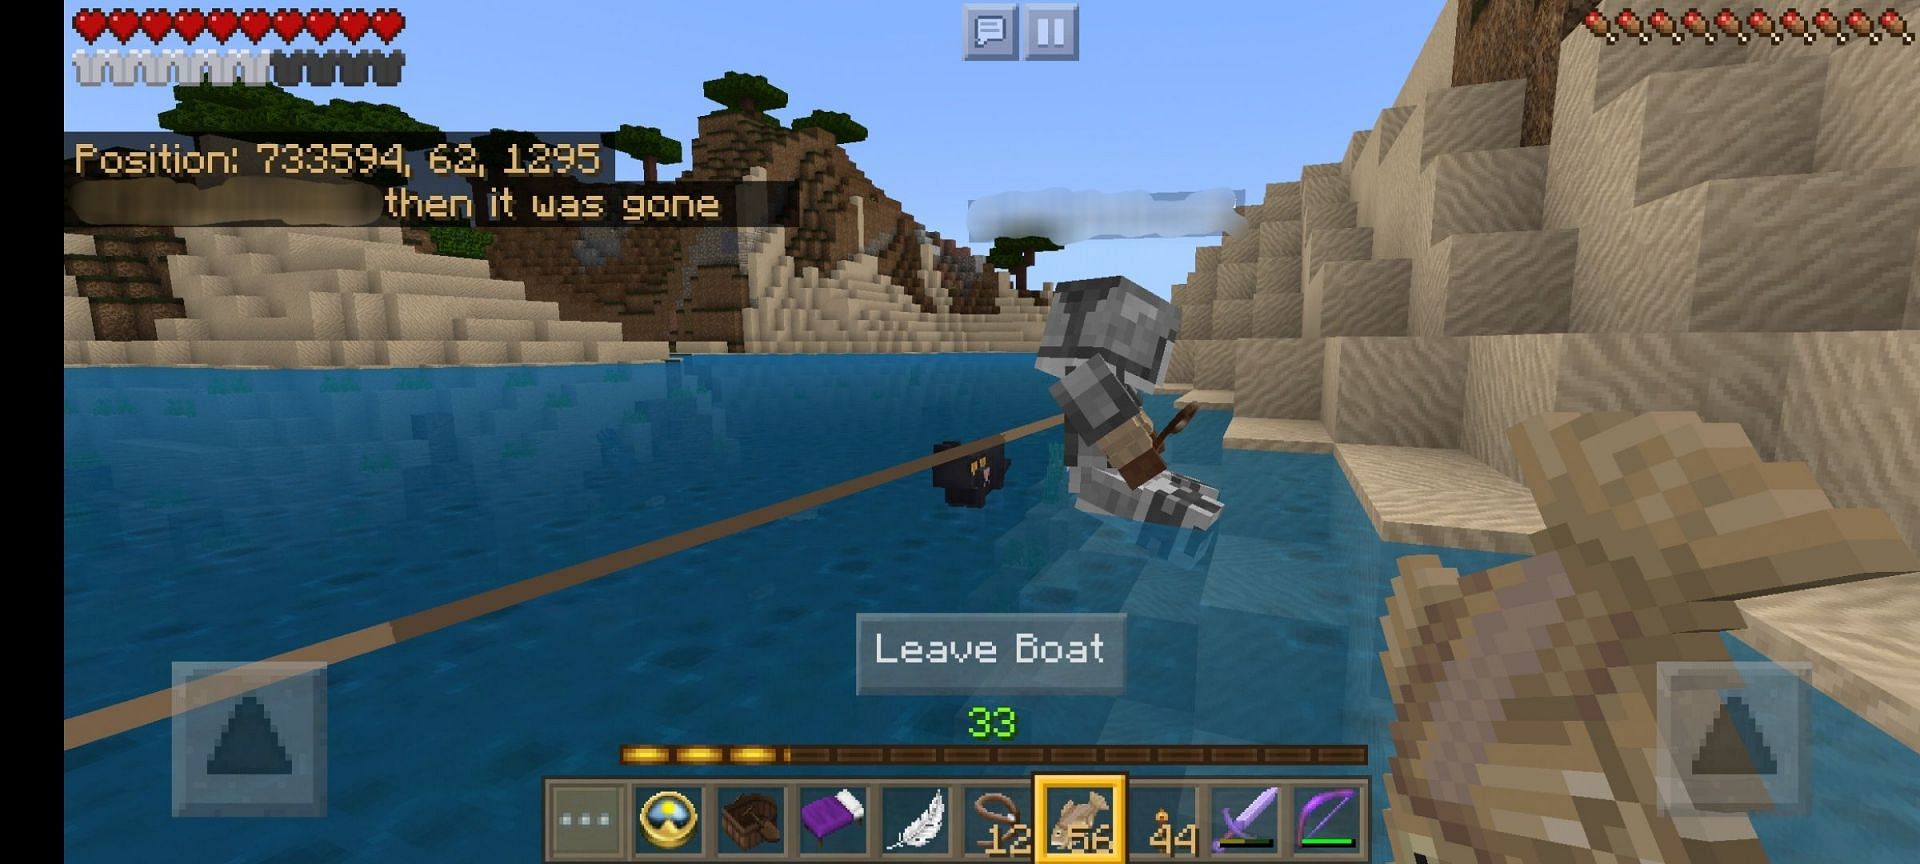 Boat disappearing whilst the player is sitting in it (Image via Mojang)